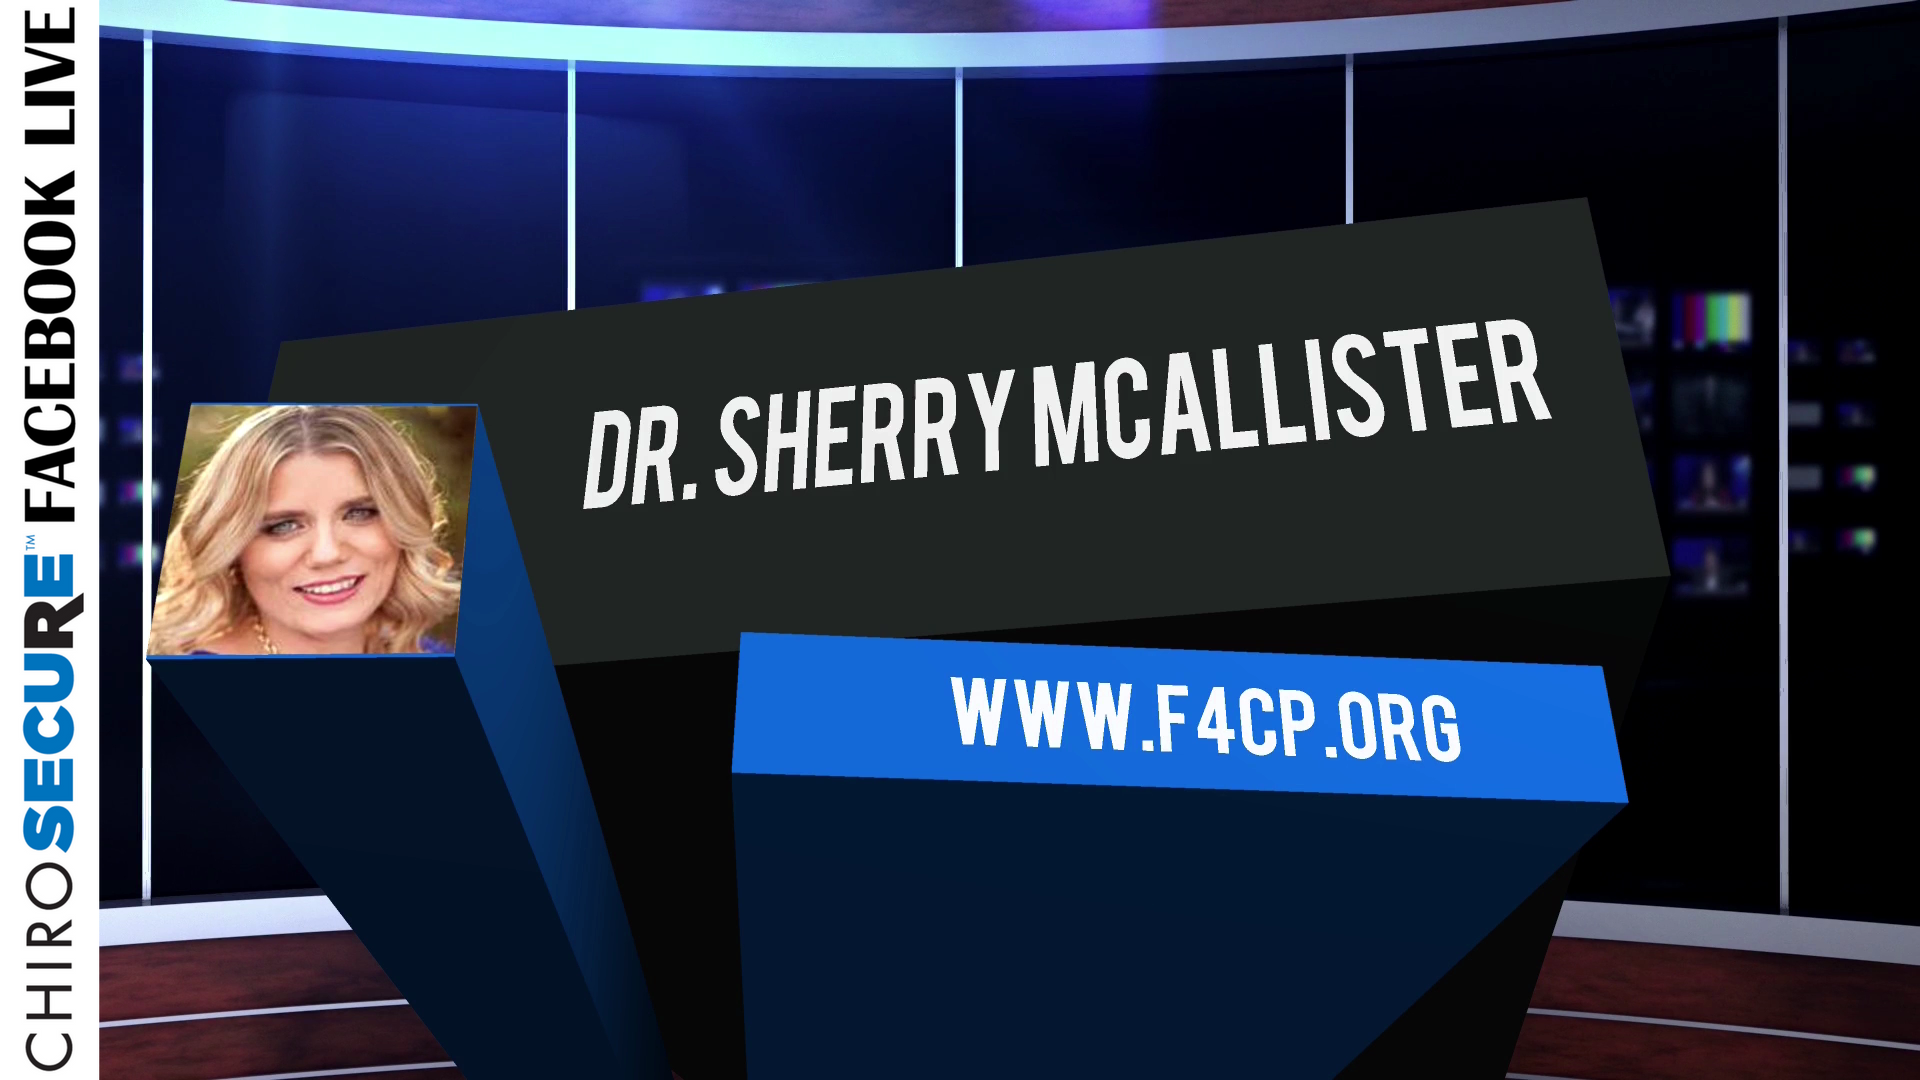 Dr. McAllister from the F4CP